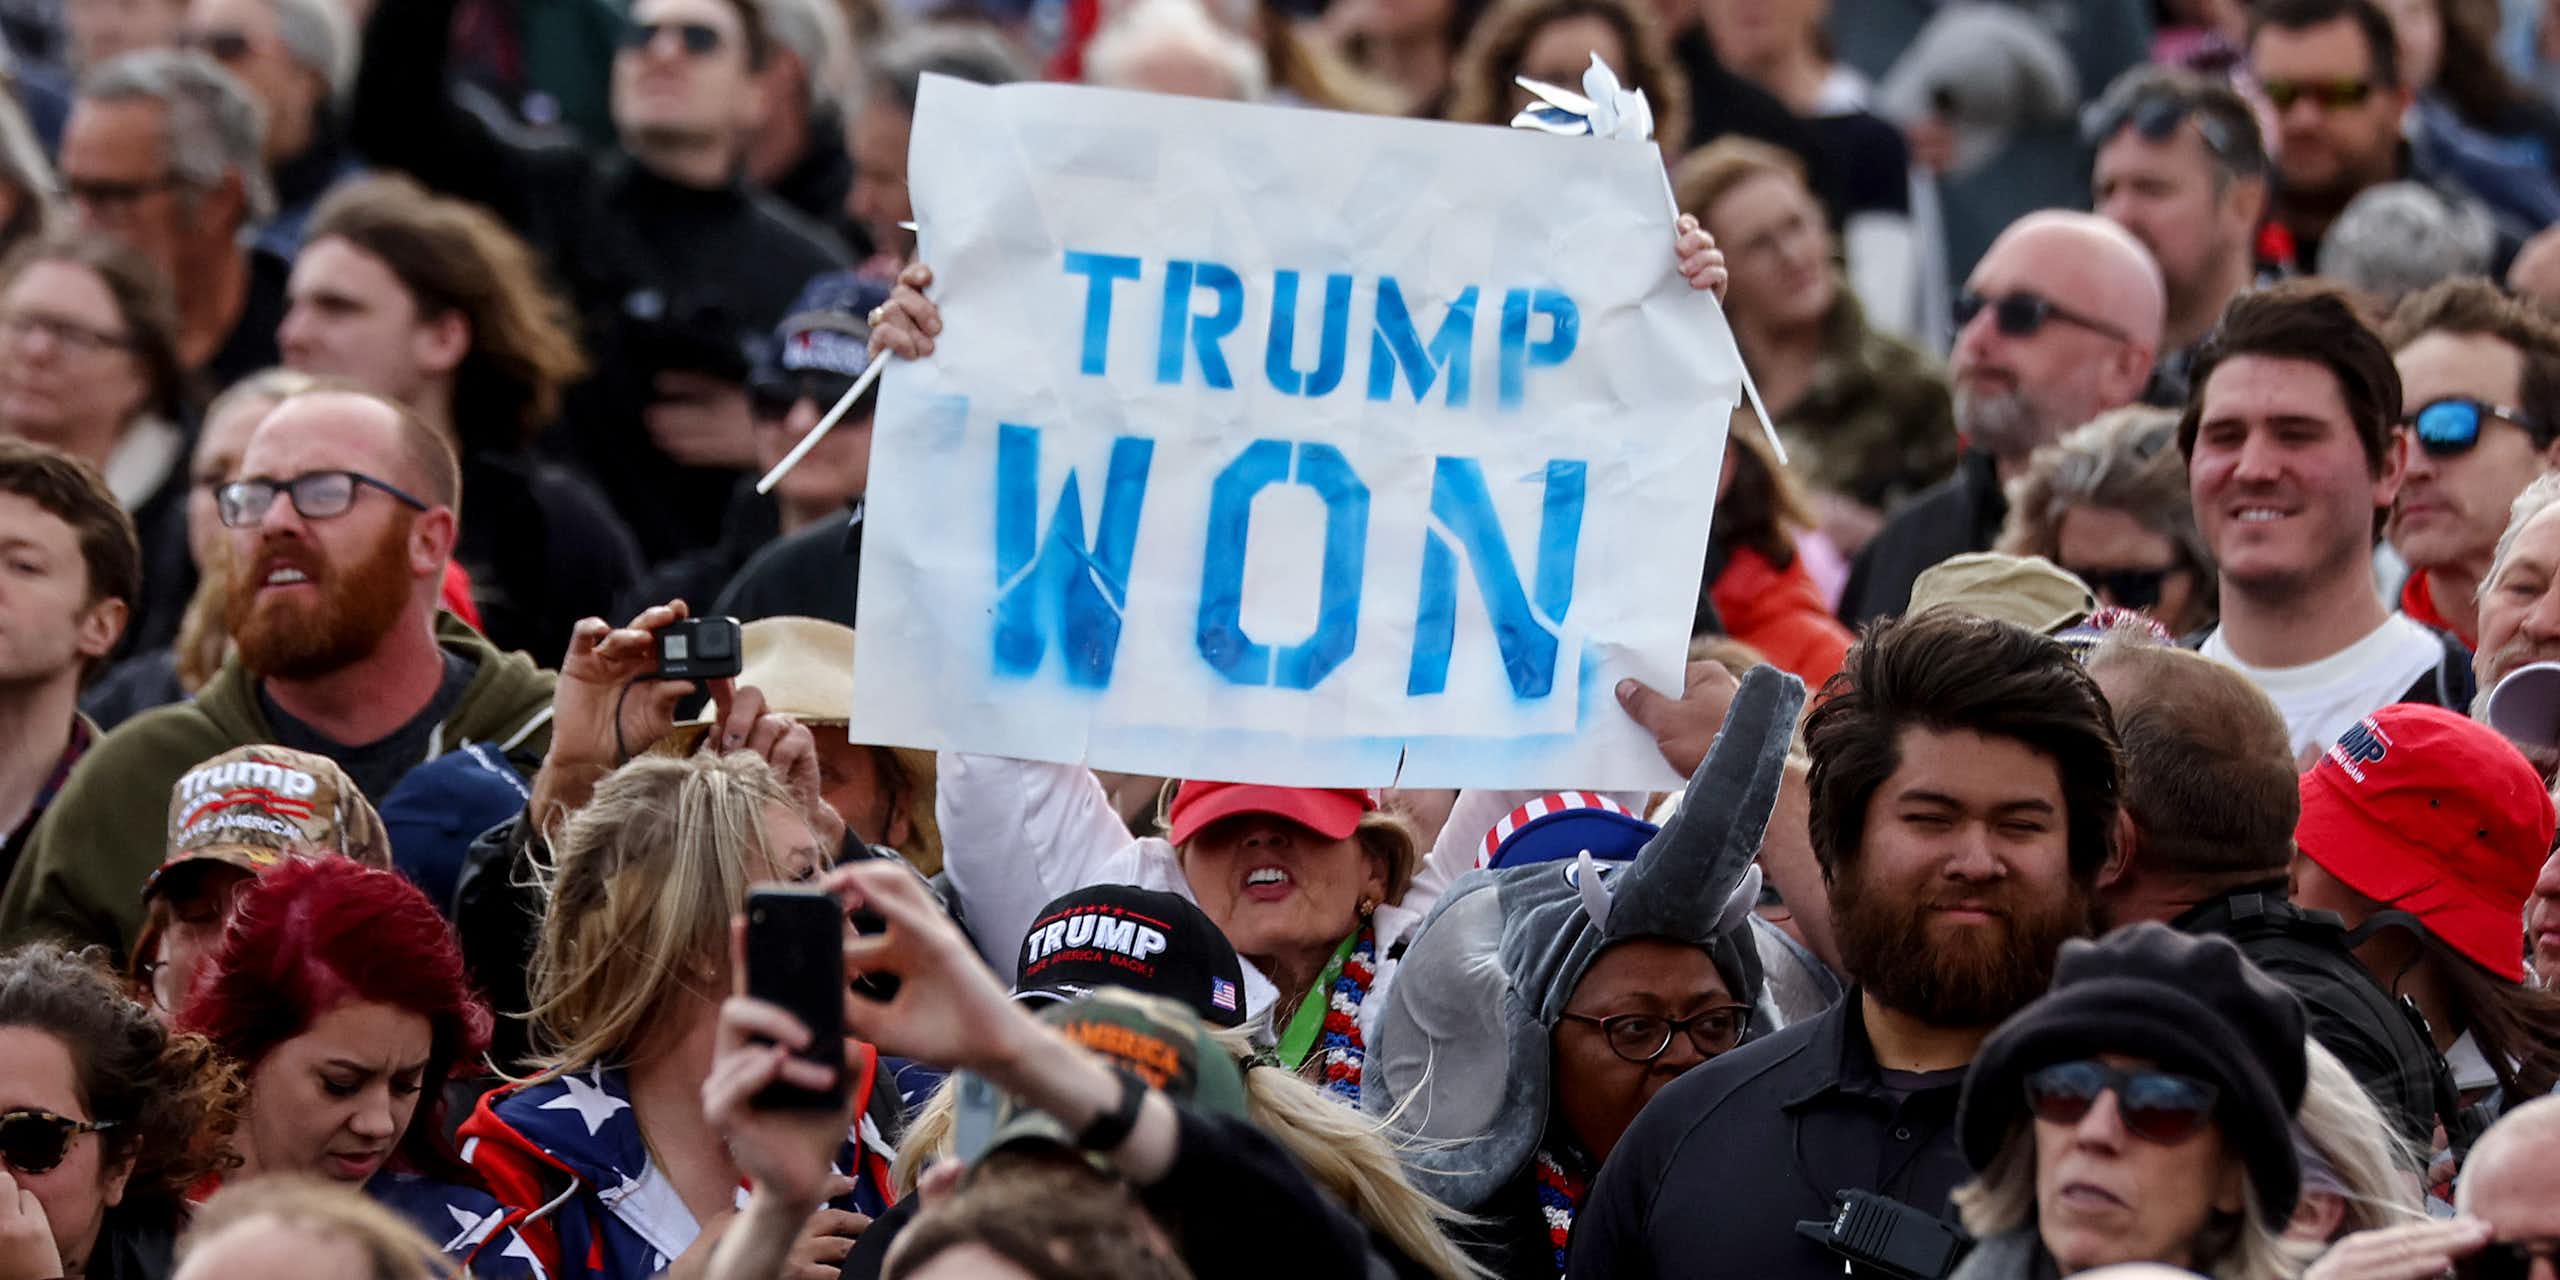 Why do millions of Americans believe the 2020 presidential election was ‘stolen’ from Donald Trump?